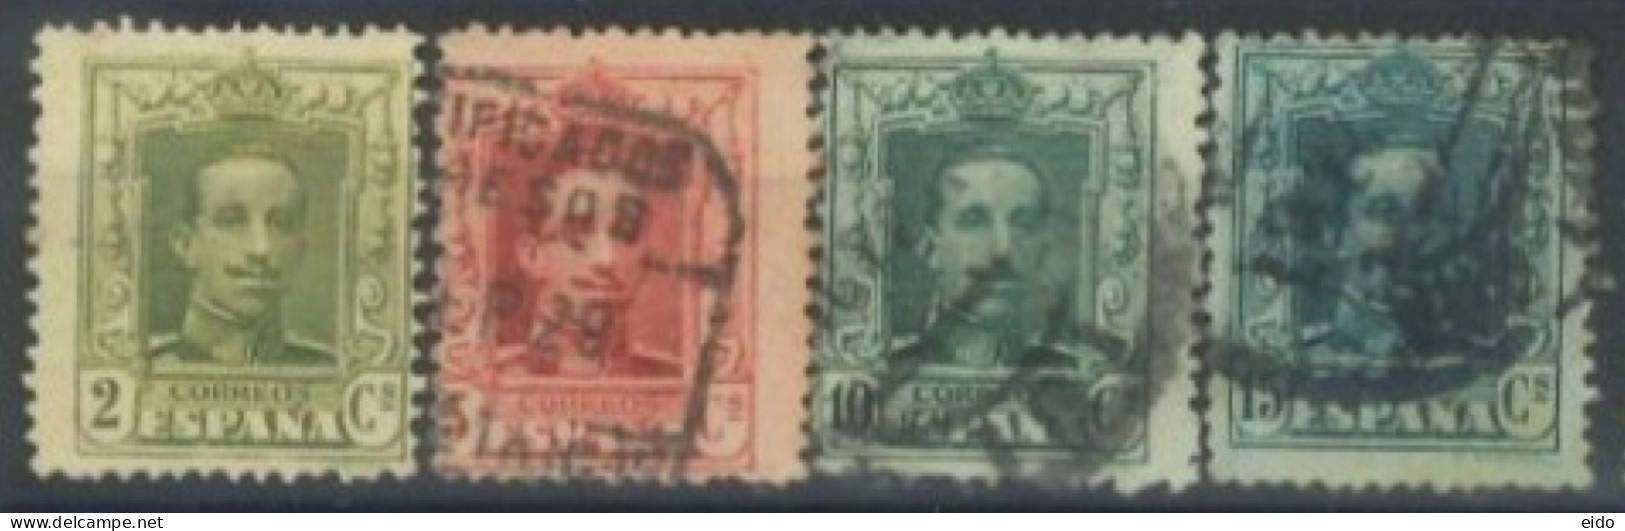 SPAIN, 1922/26, KING ALFONSO XIII STAMPS SET OF 4 # 331/32,335/36, USED. - Oblitérés